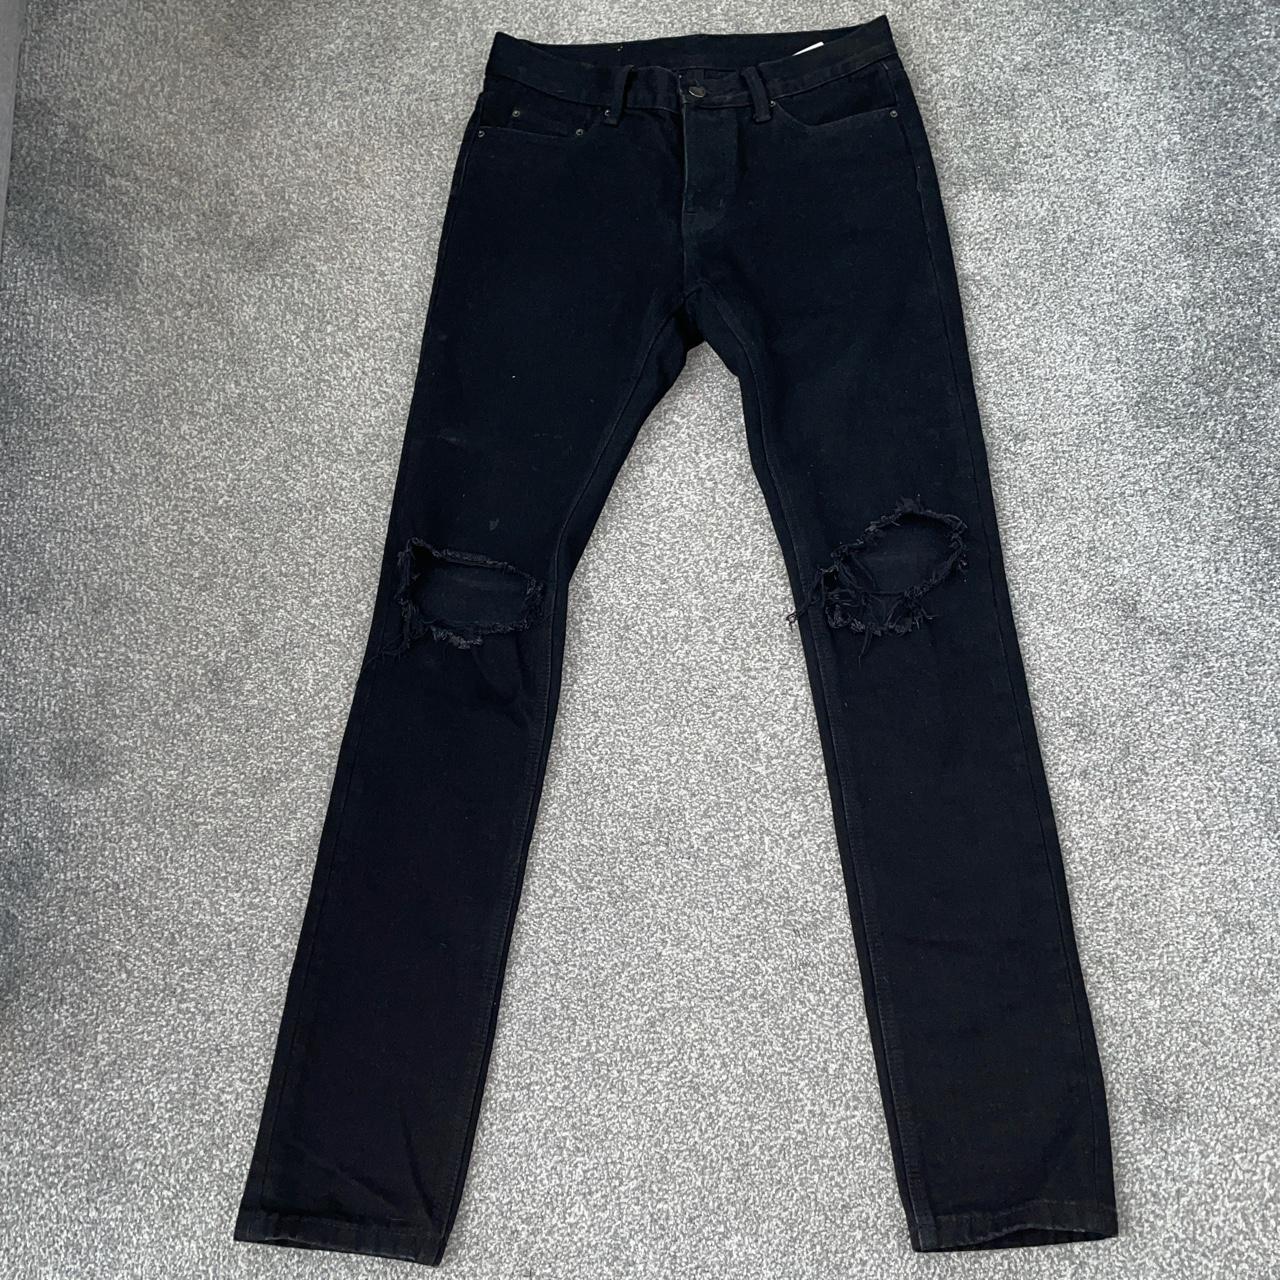 Product Image 1 - mnml black ripped skinny jeans